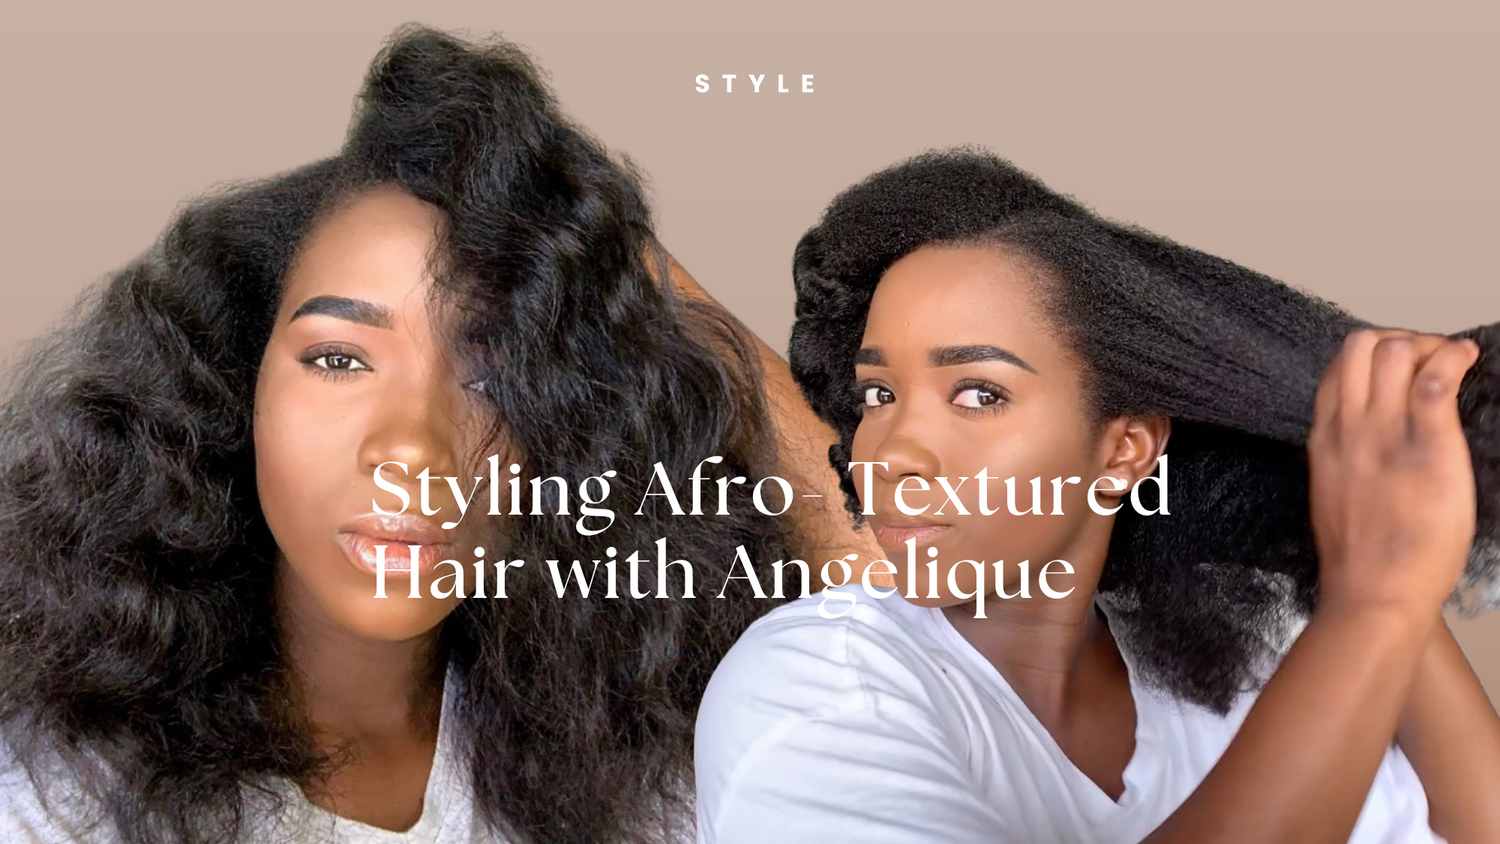 Styling 4+ textured hair with Angelique - Organic SUKU